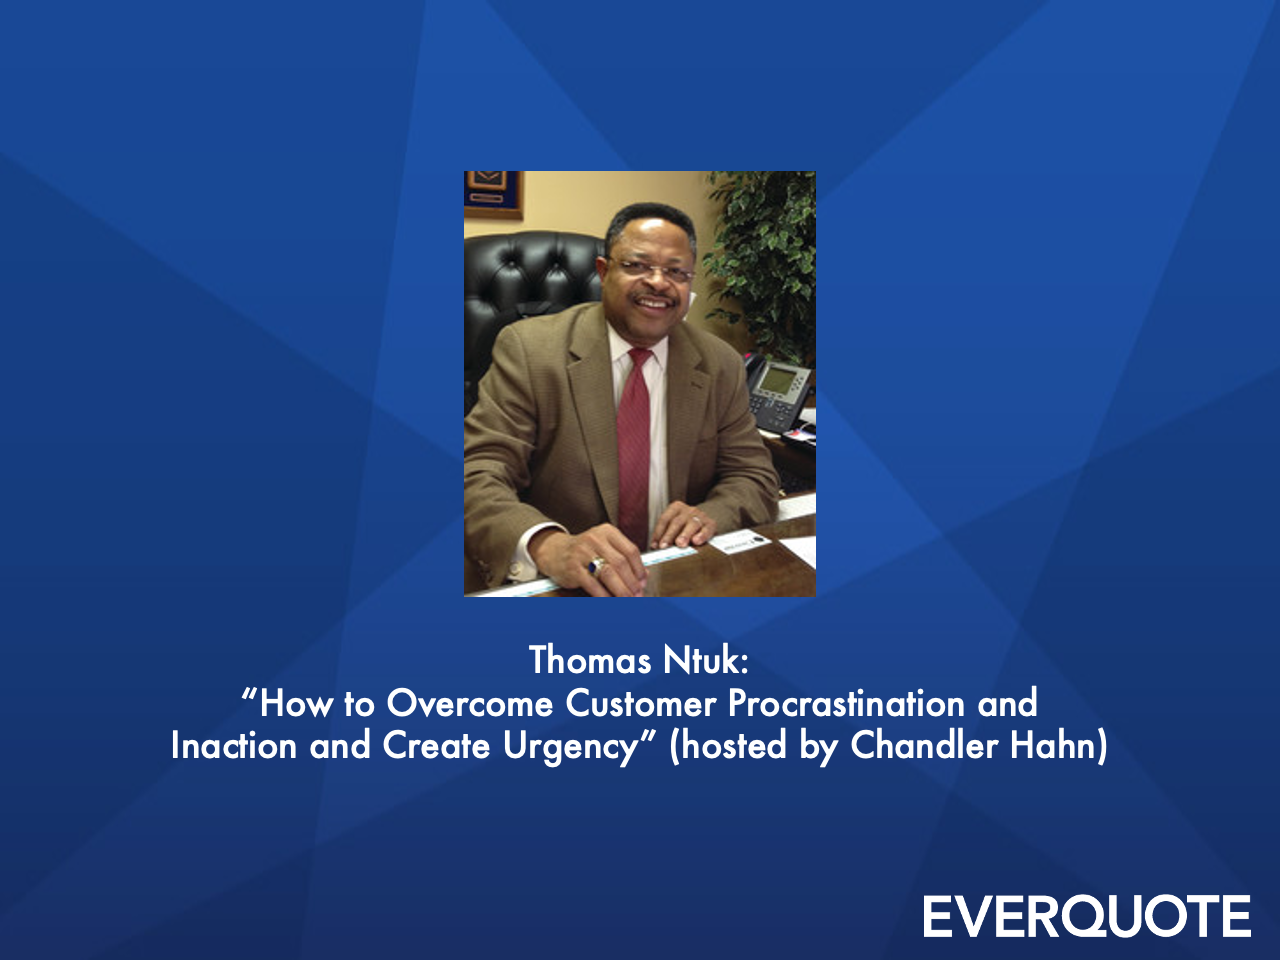 How to Overcome Customer Procrastination and Inaction and Create Urgency with Thomas Ntuk